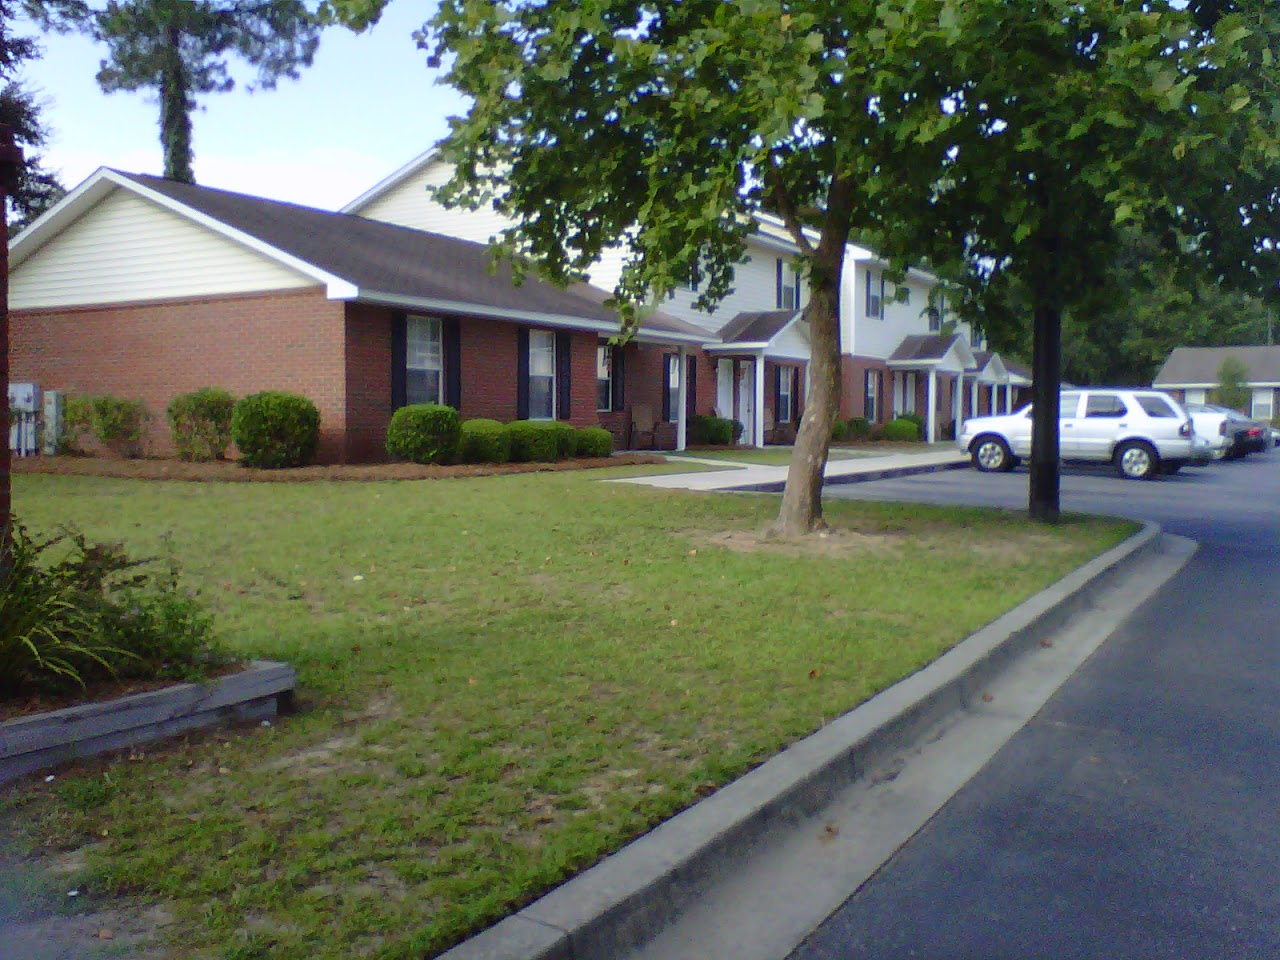 Photo of ARBOR TRACE II APARTMENTS at 4700 ROLLING PINE DR LAKE PARK, GA 31636